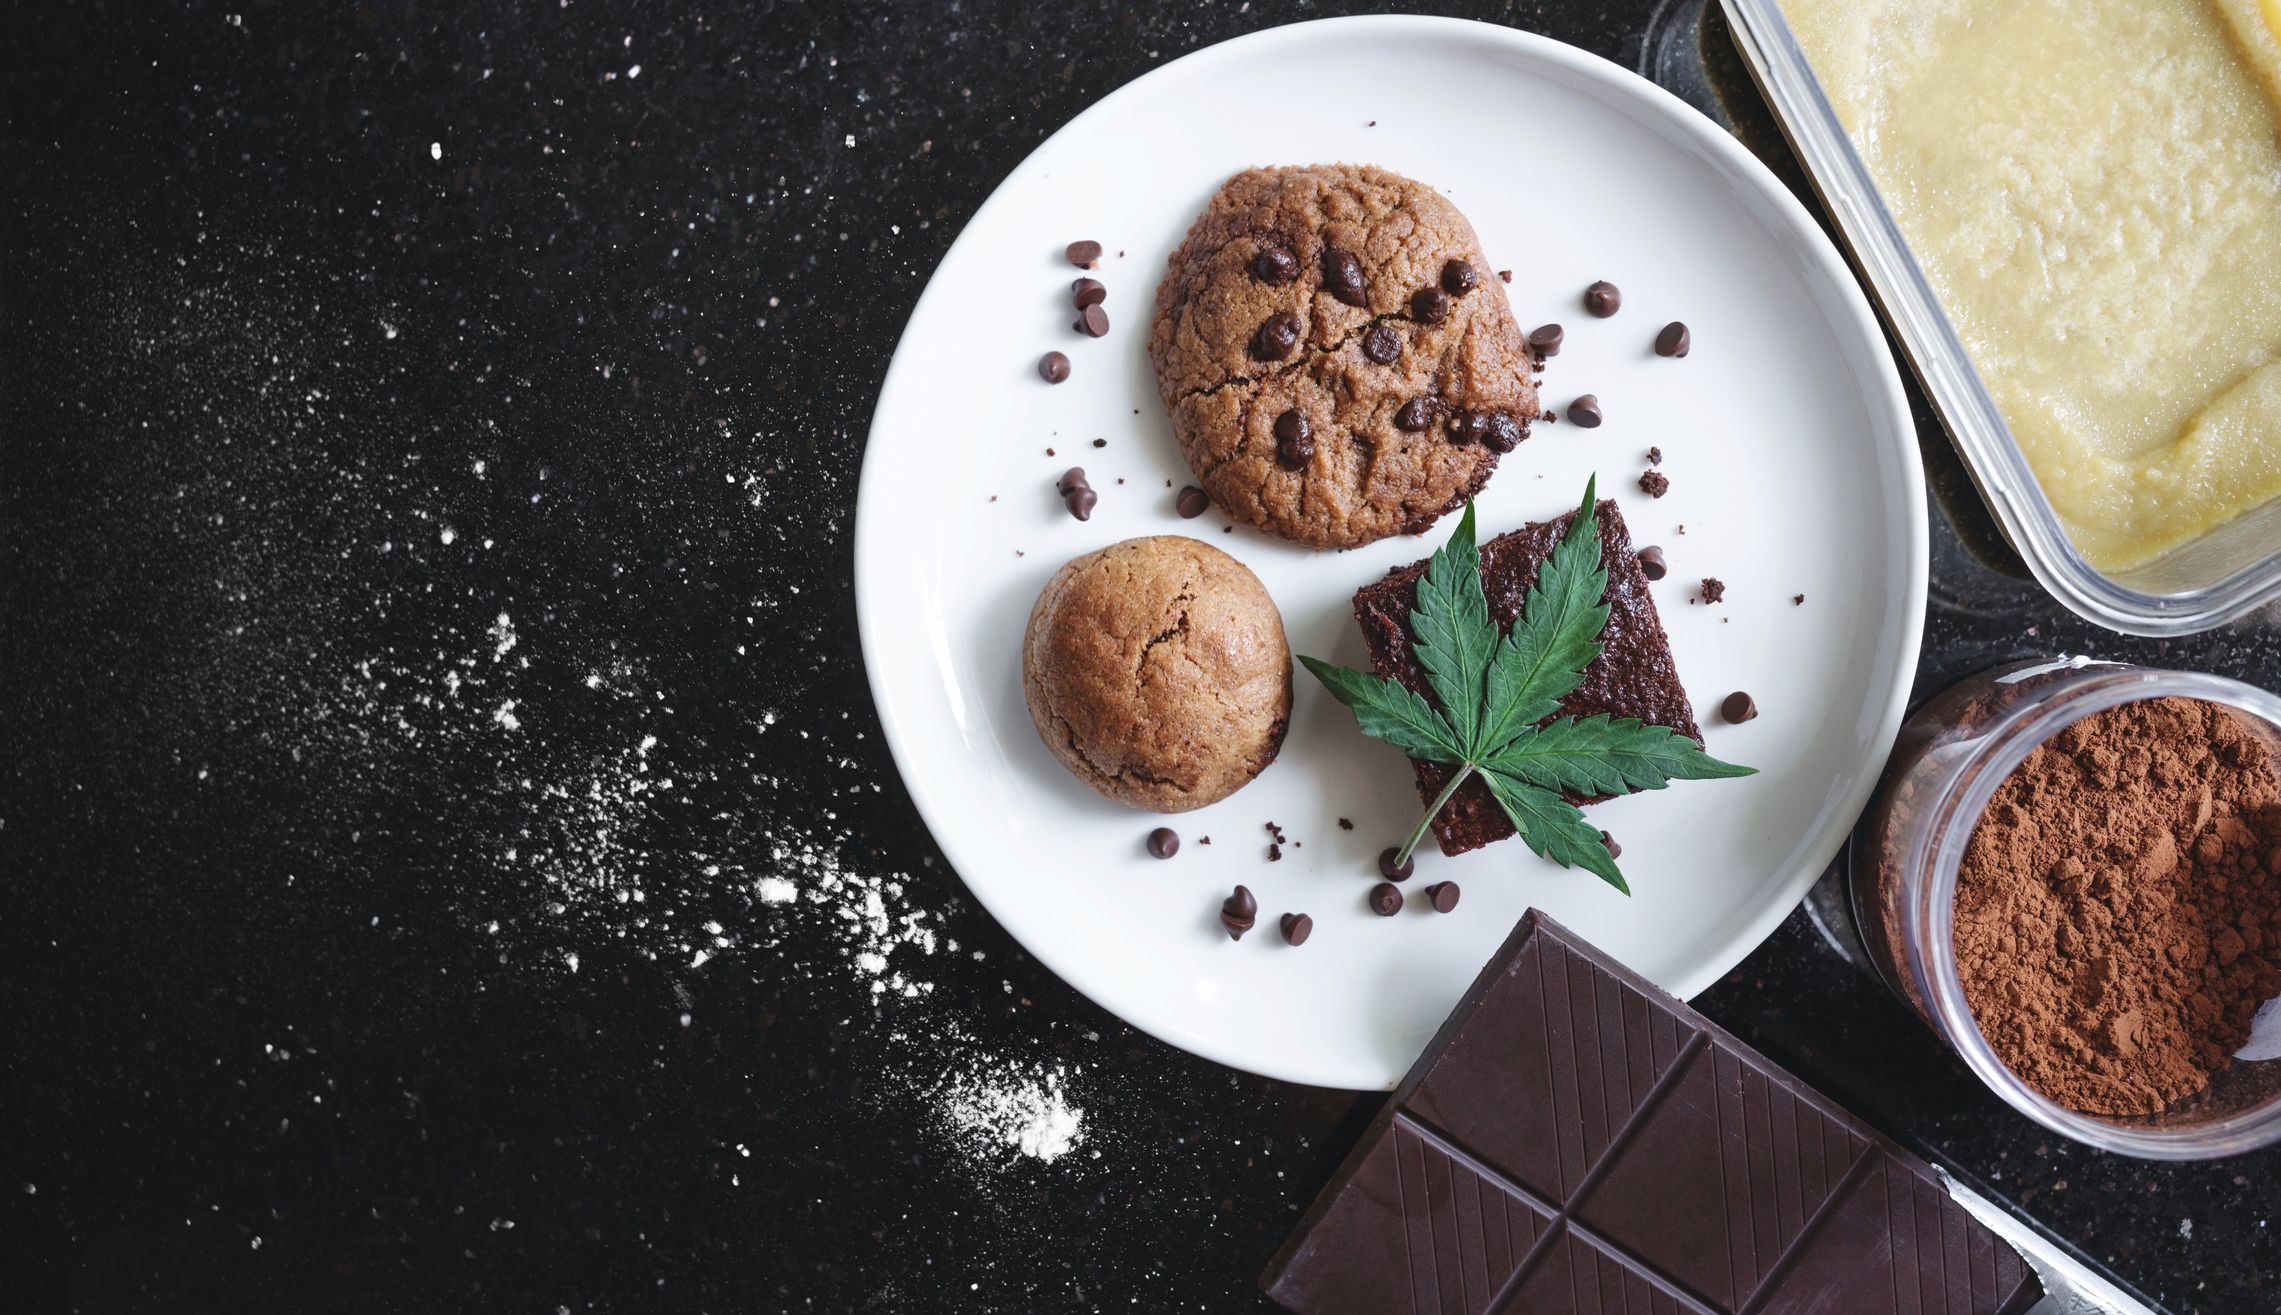 Baked desserts cookie, brownie and bun infused with cannabis, with cannabis leaf and ingredients